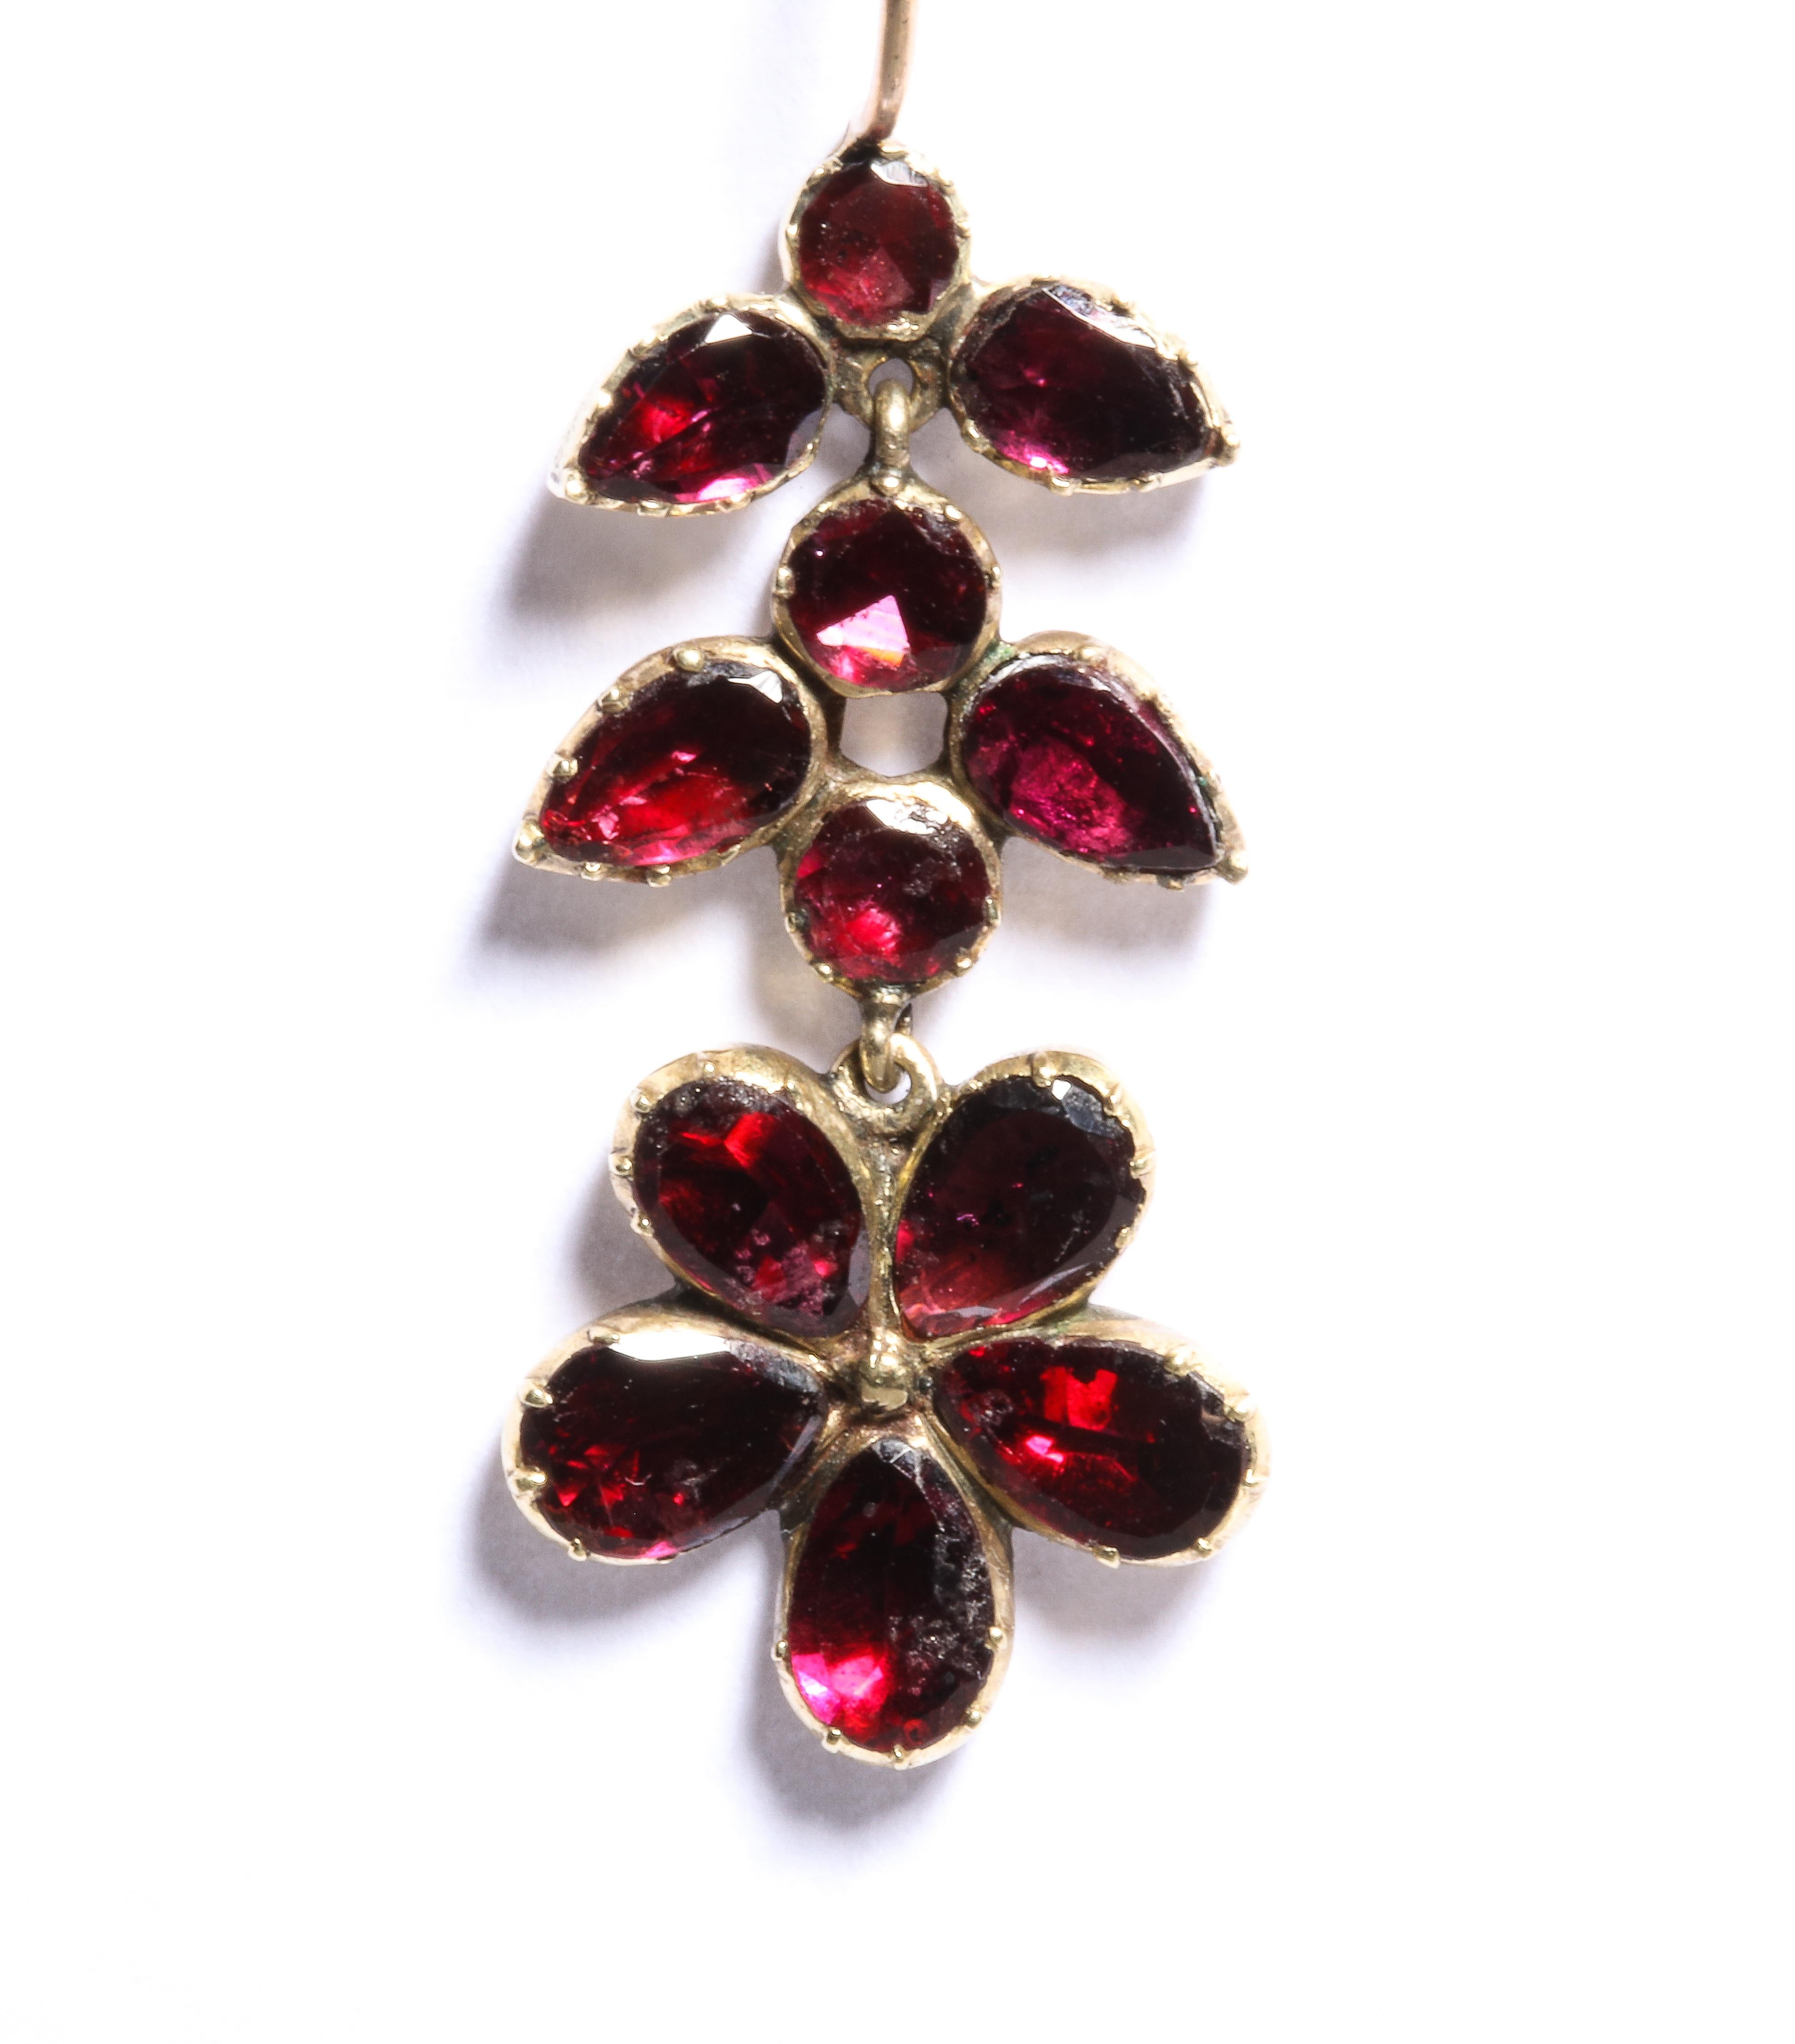 From the Age of Elegance and Poetry in the early 19th century come these flat cut garnet earrings suspending forget-me-not flowers. Garnets were in high demand for their glowing red color, a color that is lovely on any complexion and because they